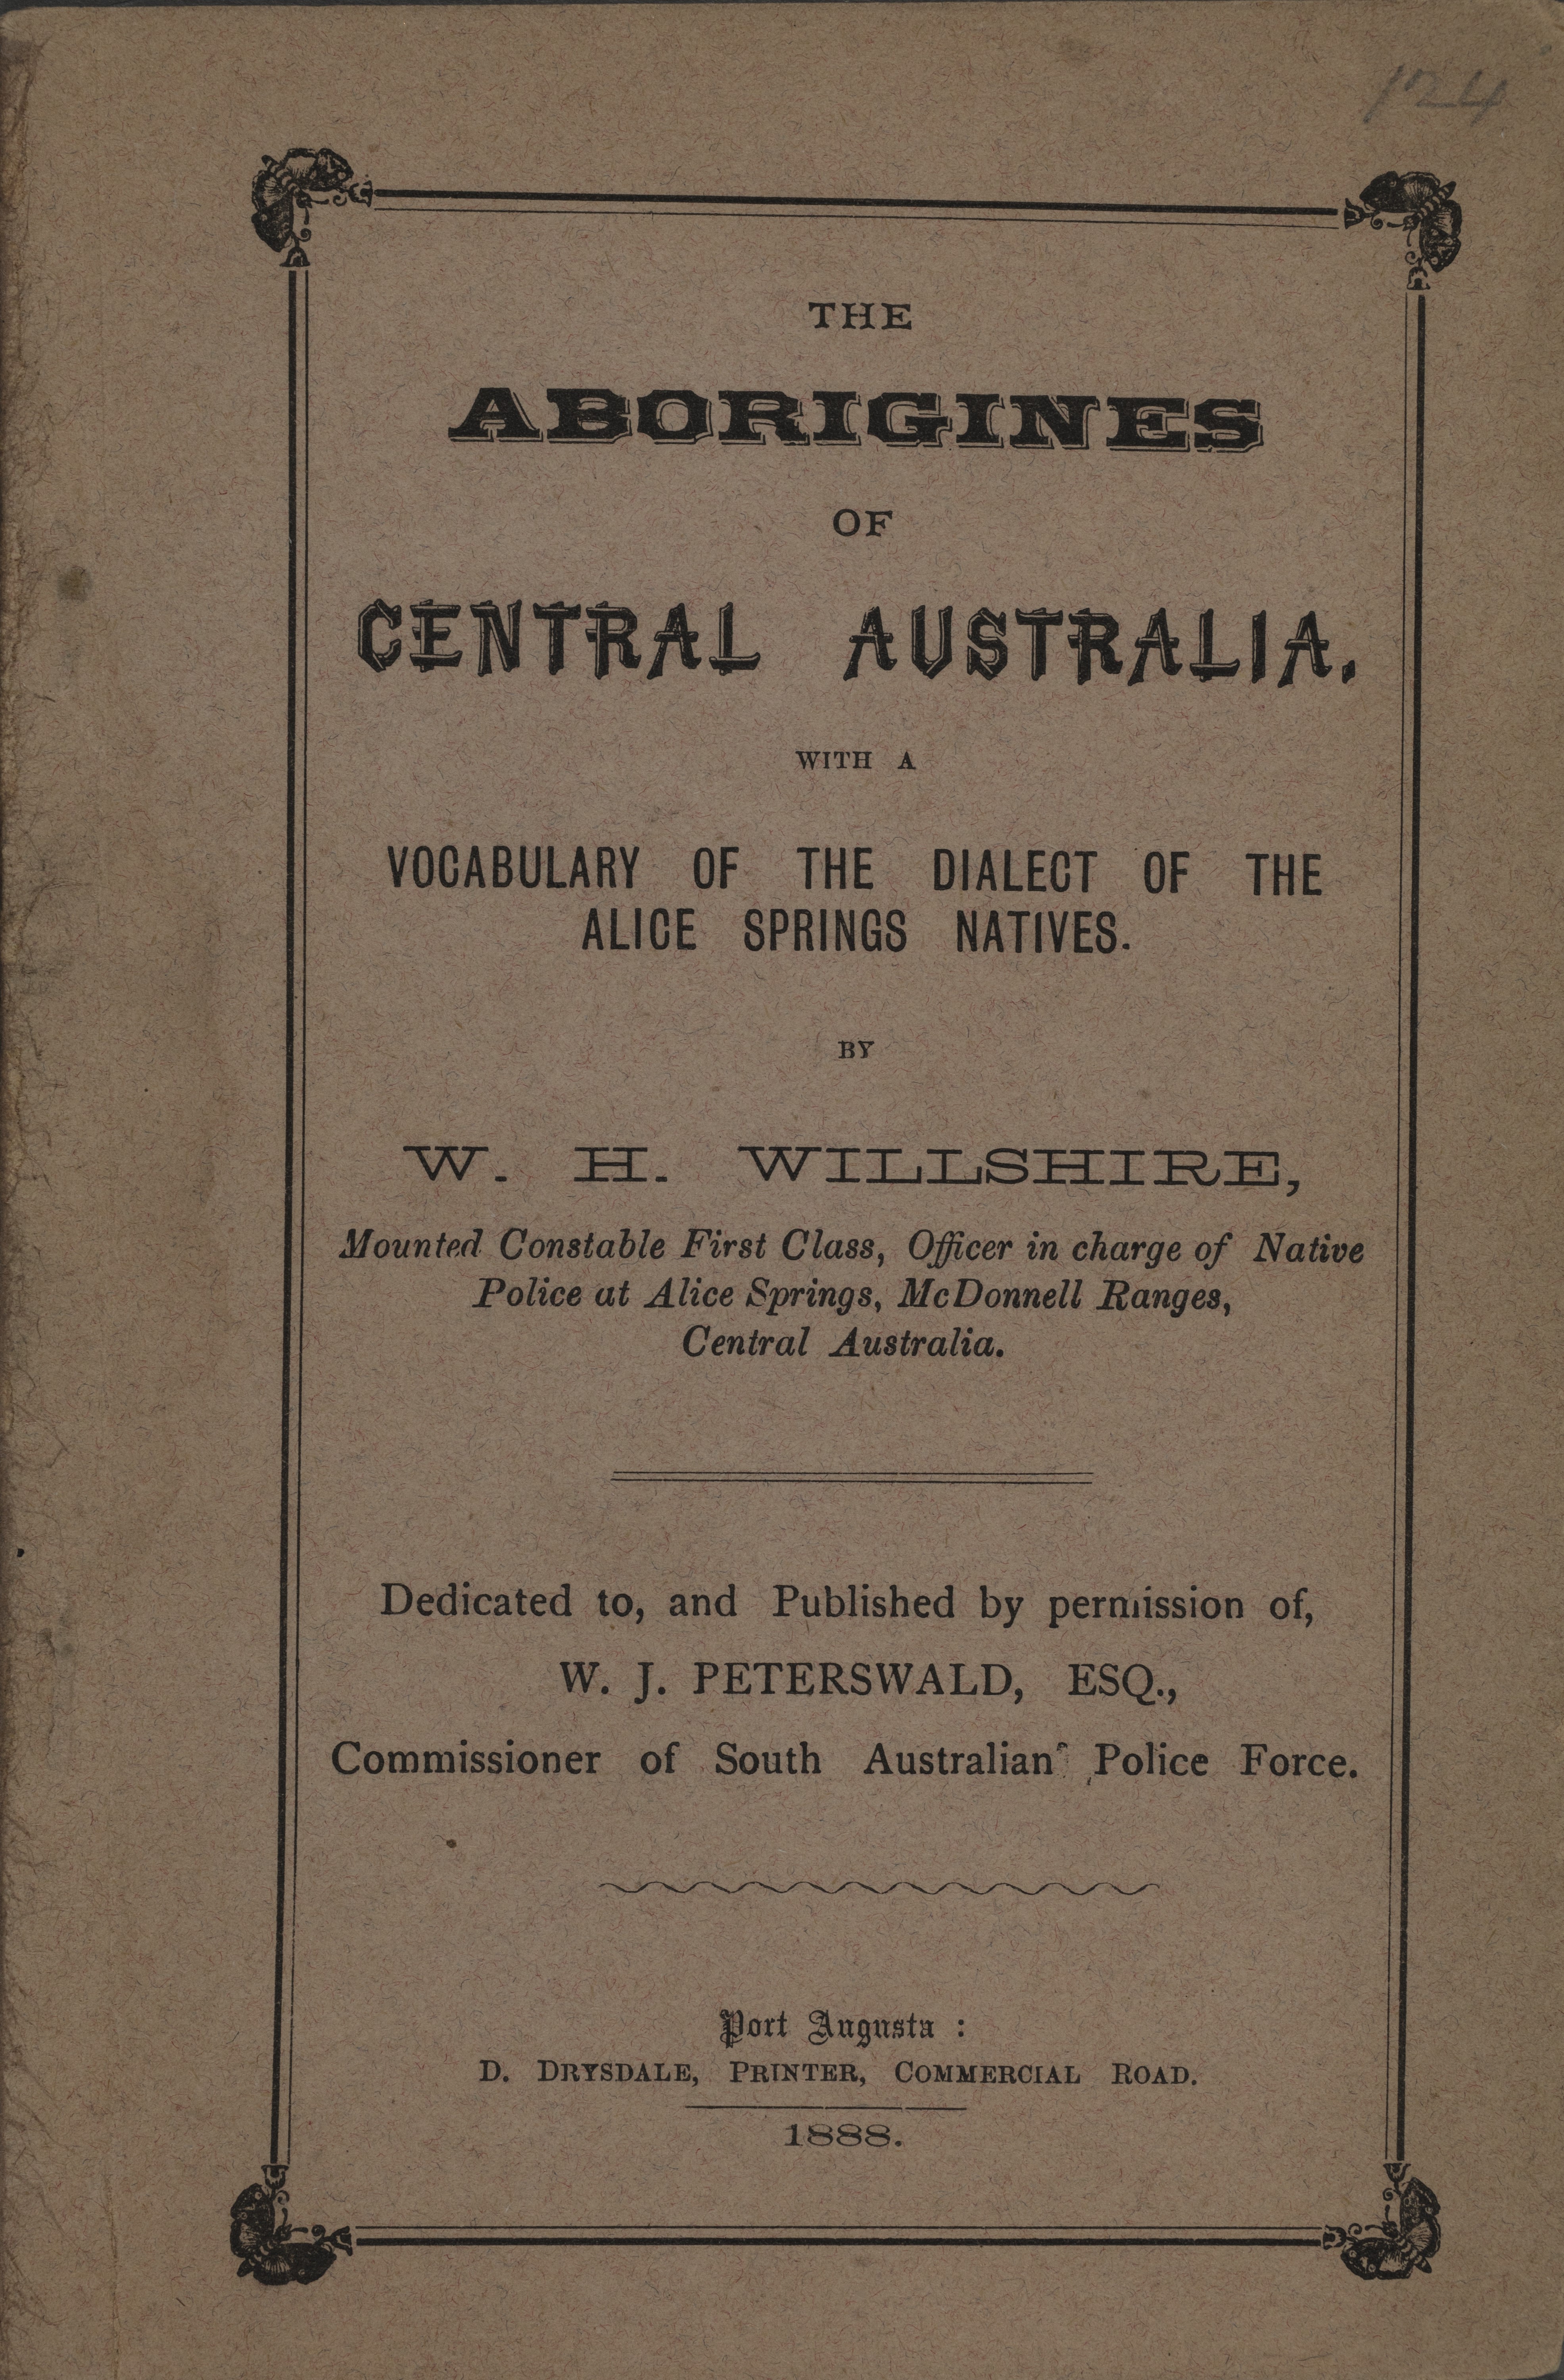 Title page for book The Aborigines of Centre Australia published in 1888.